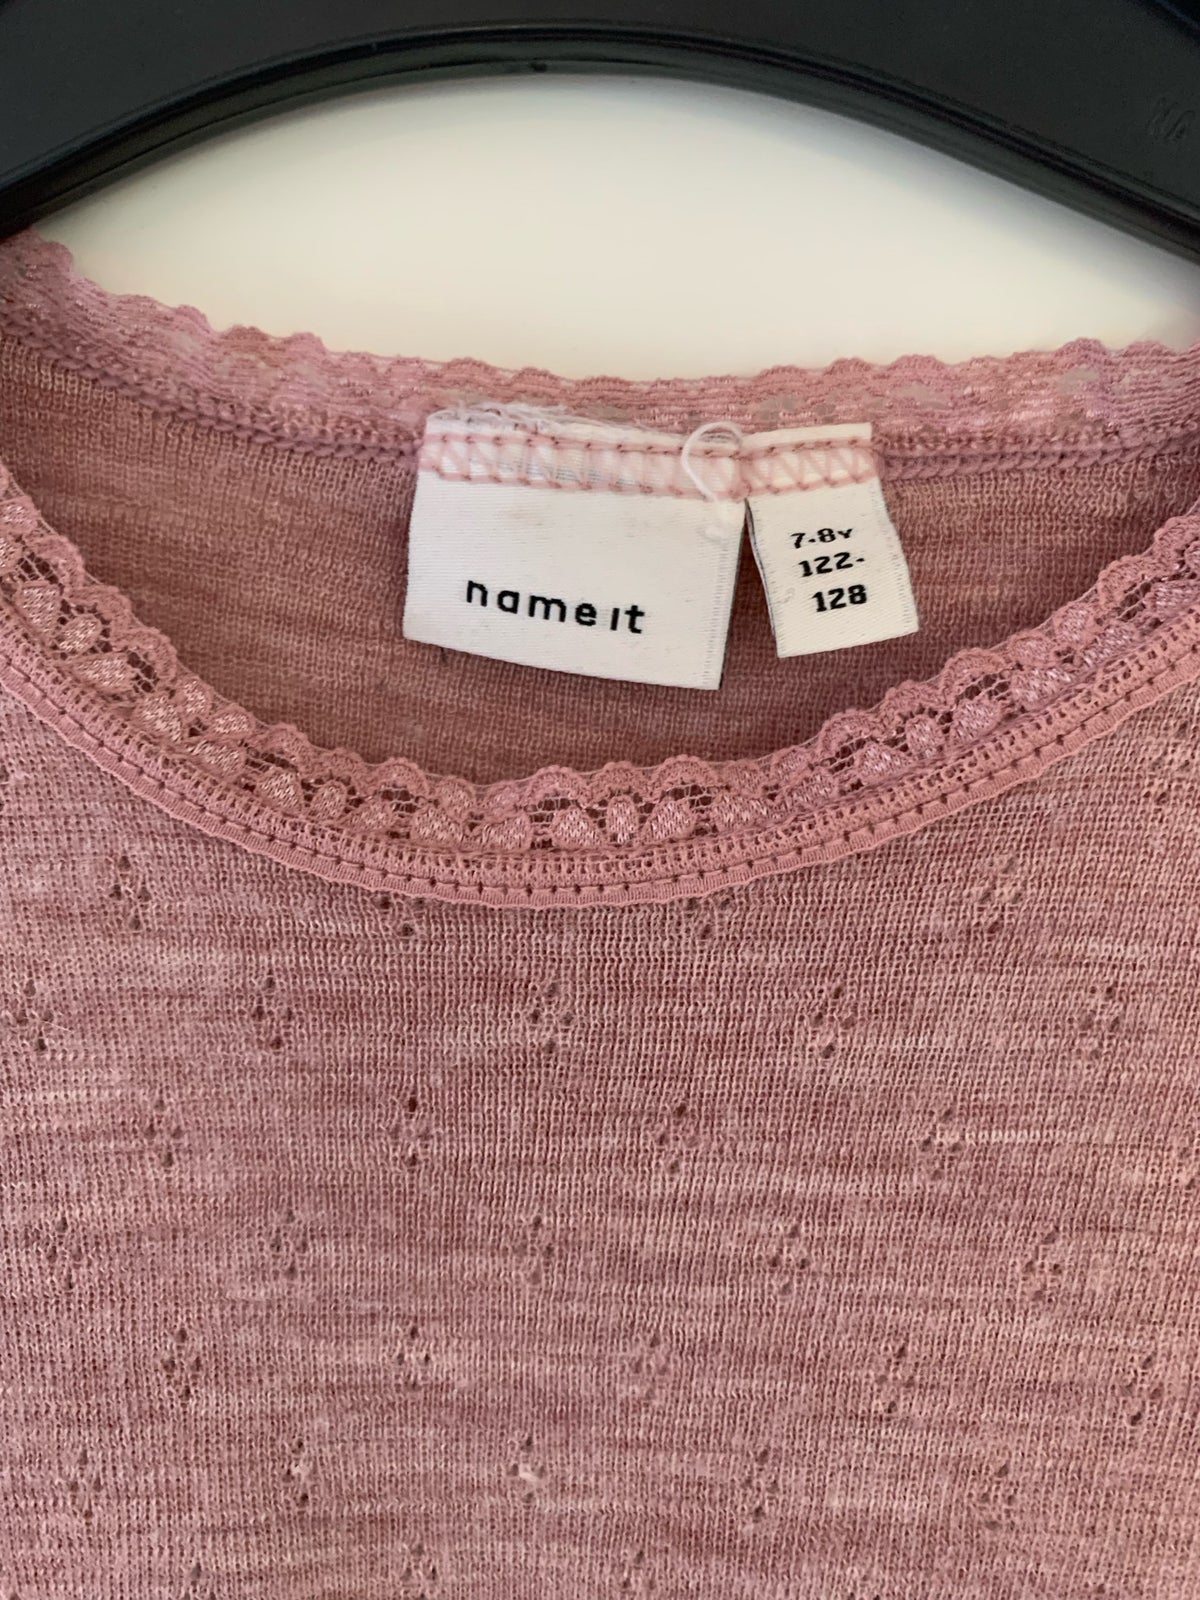 Bluse, Uld bluse, Name it